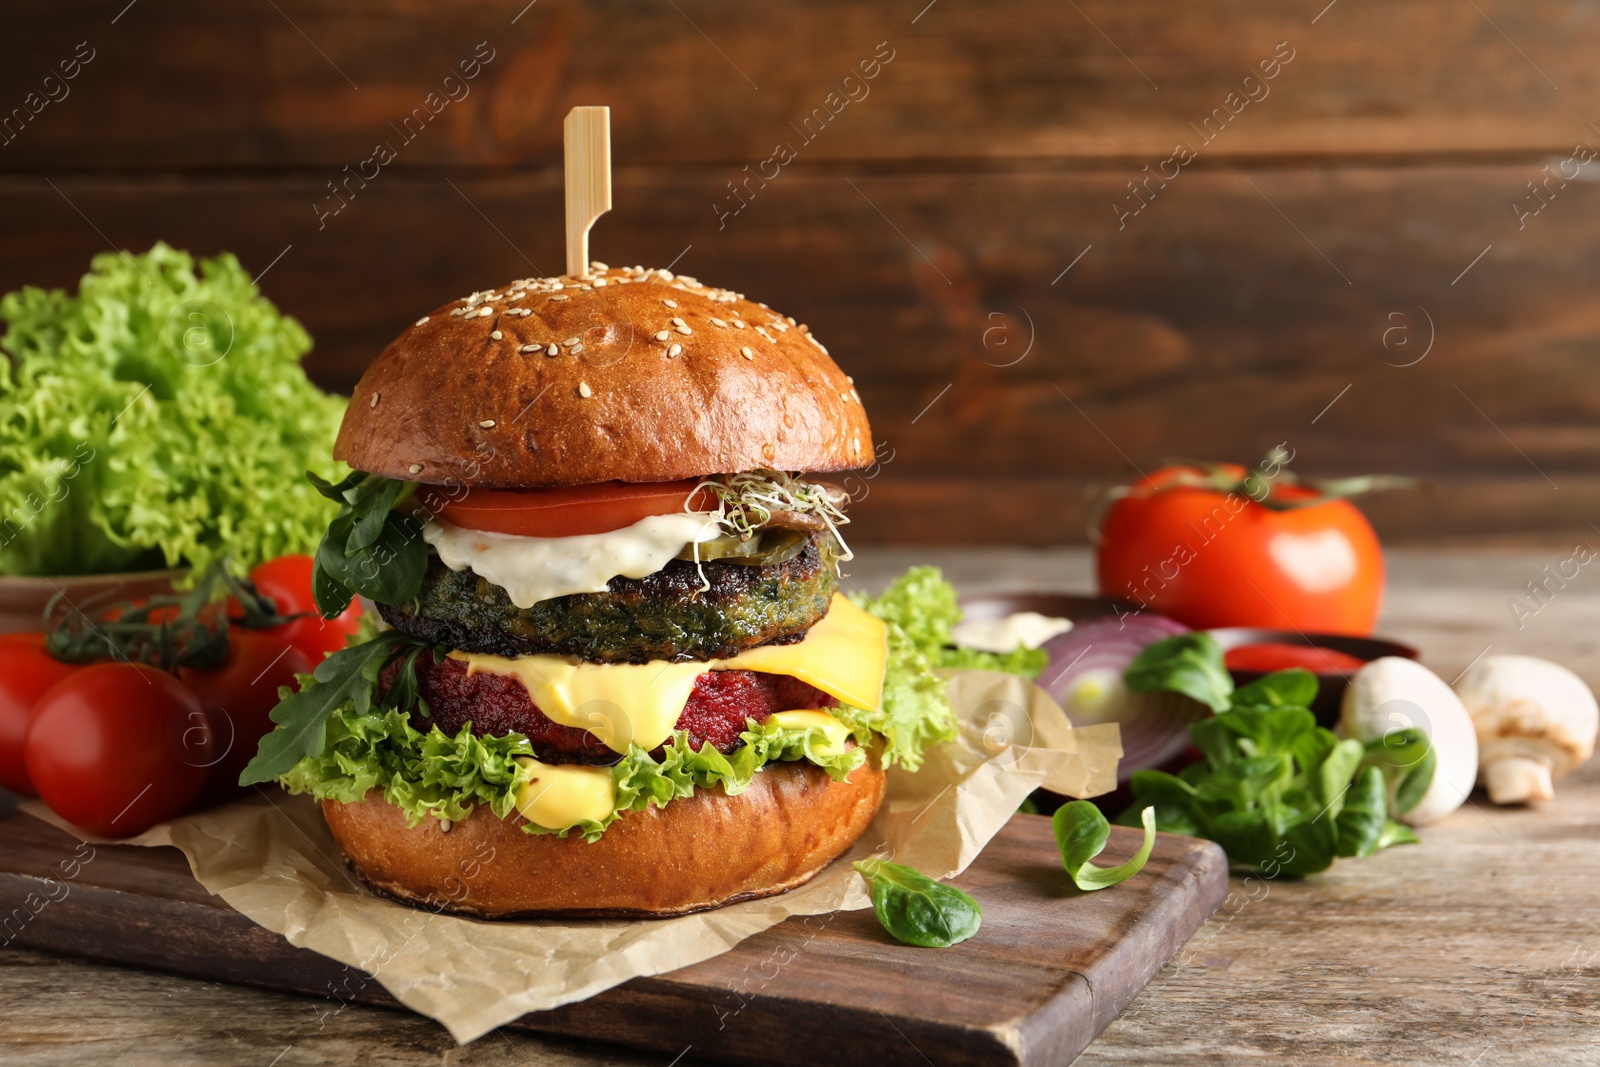 Photo of Vegan burger and vegetables on table against wooden background